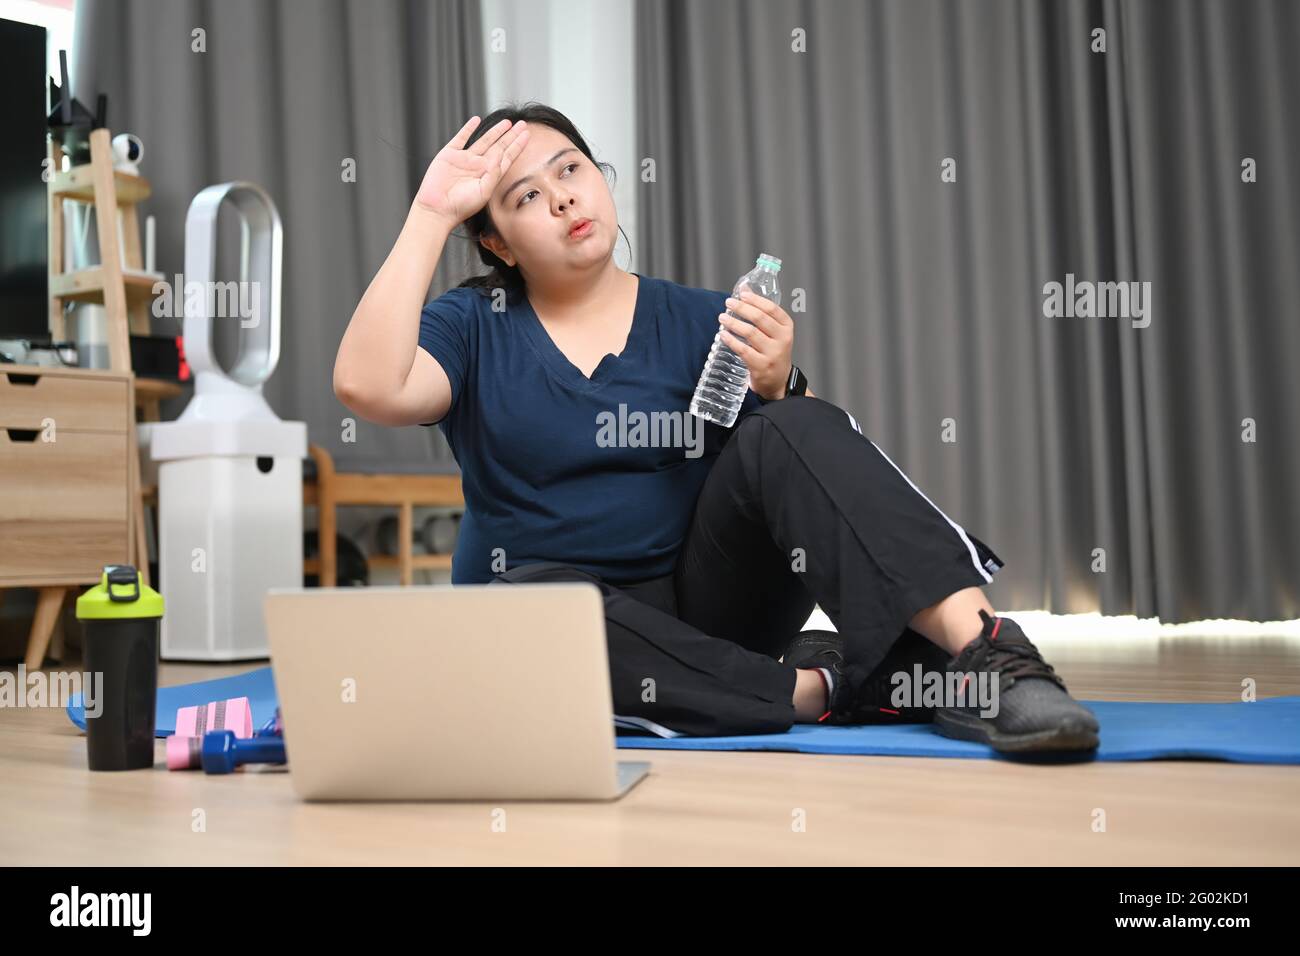 Tired young obese woman sitting and resting after doing fitness exercises at home. Stock Photo